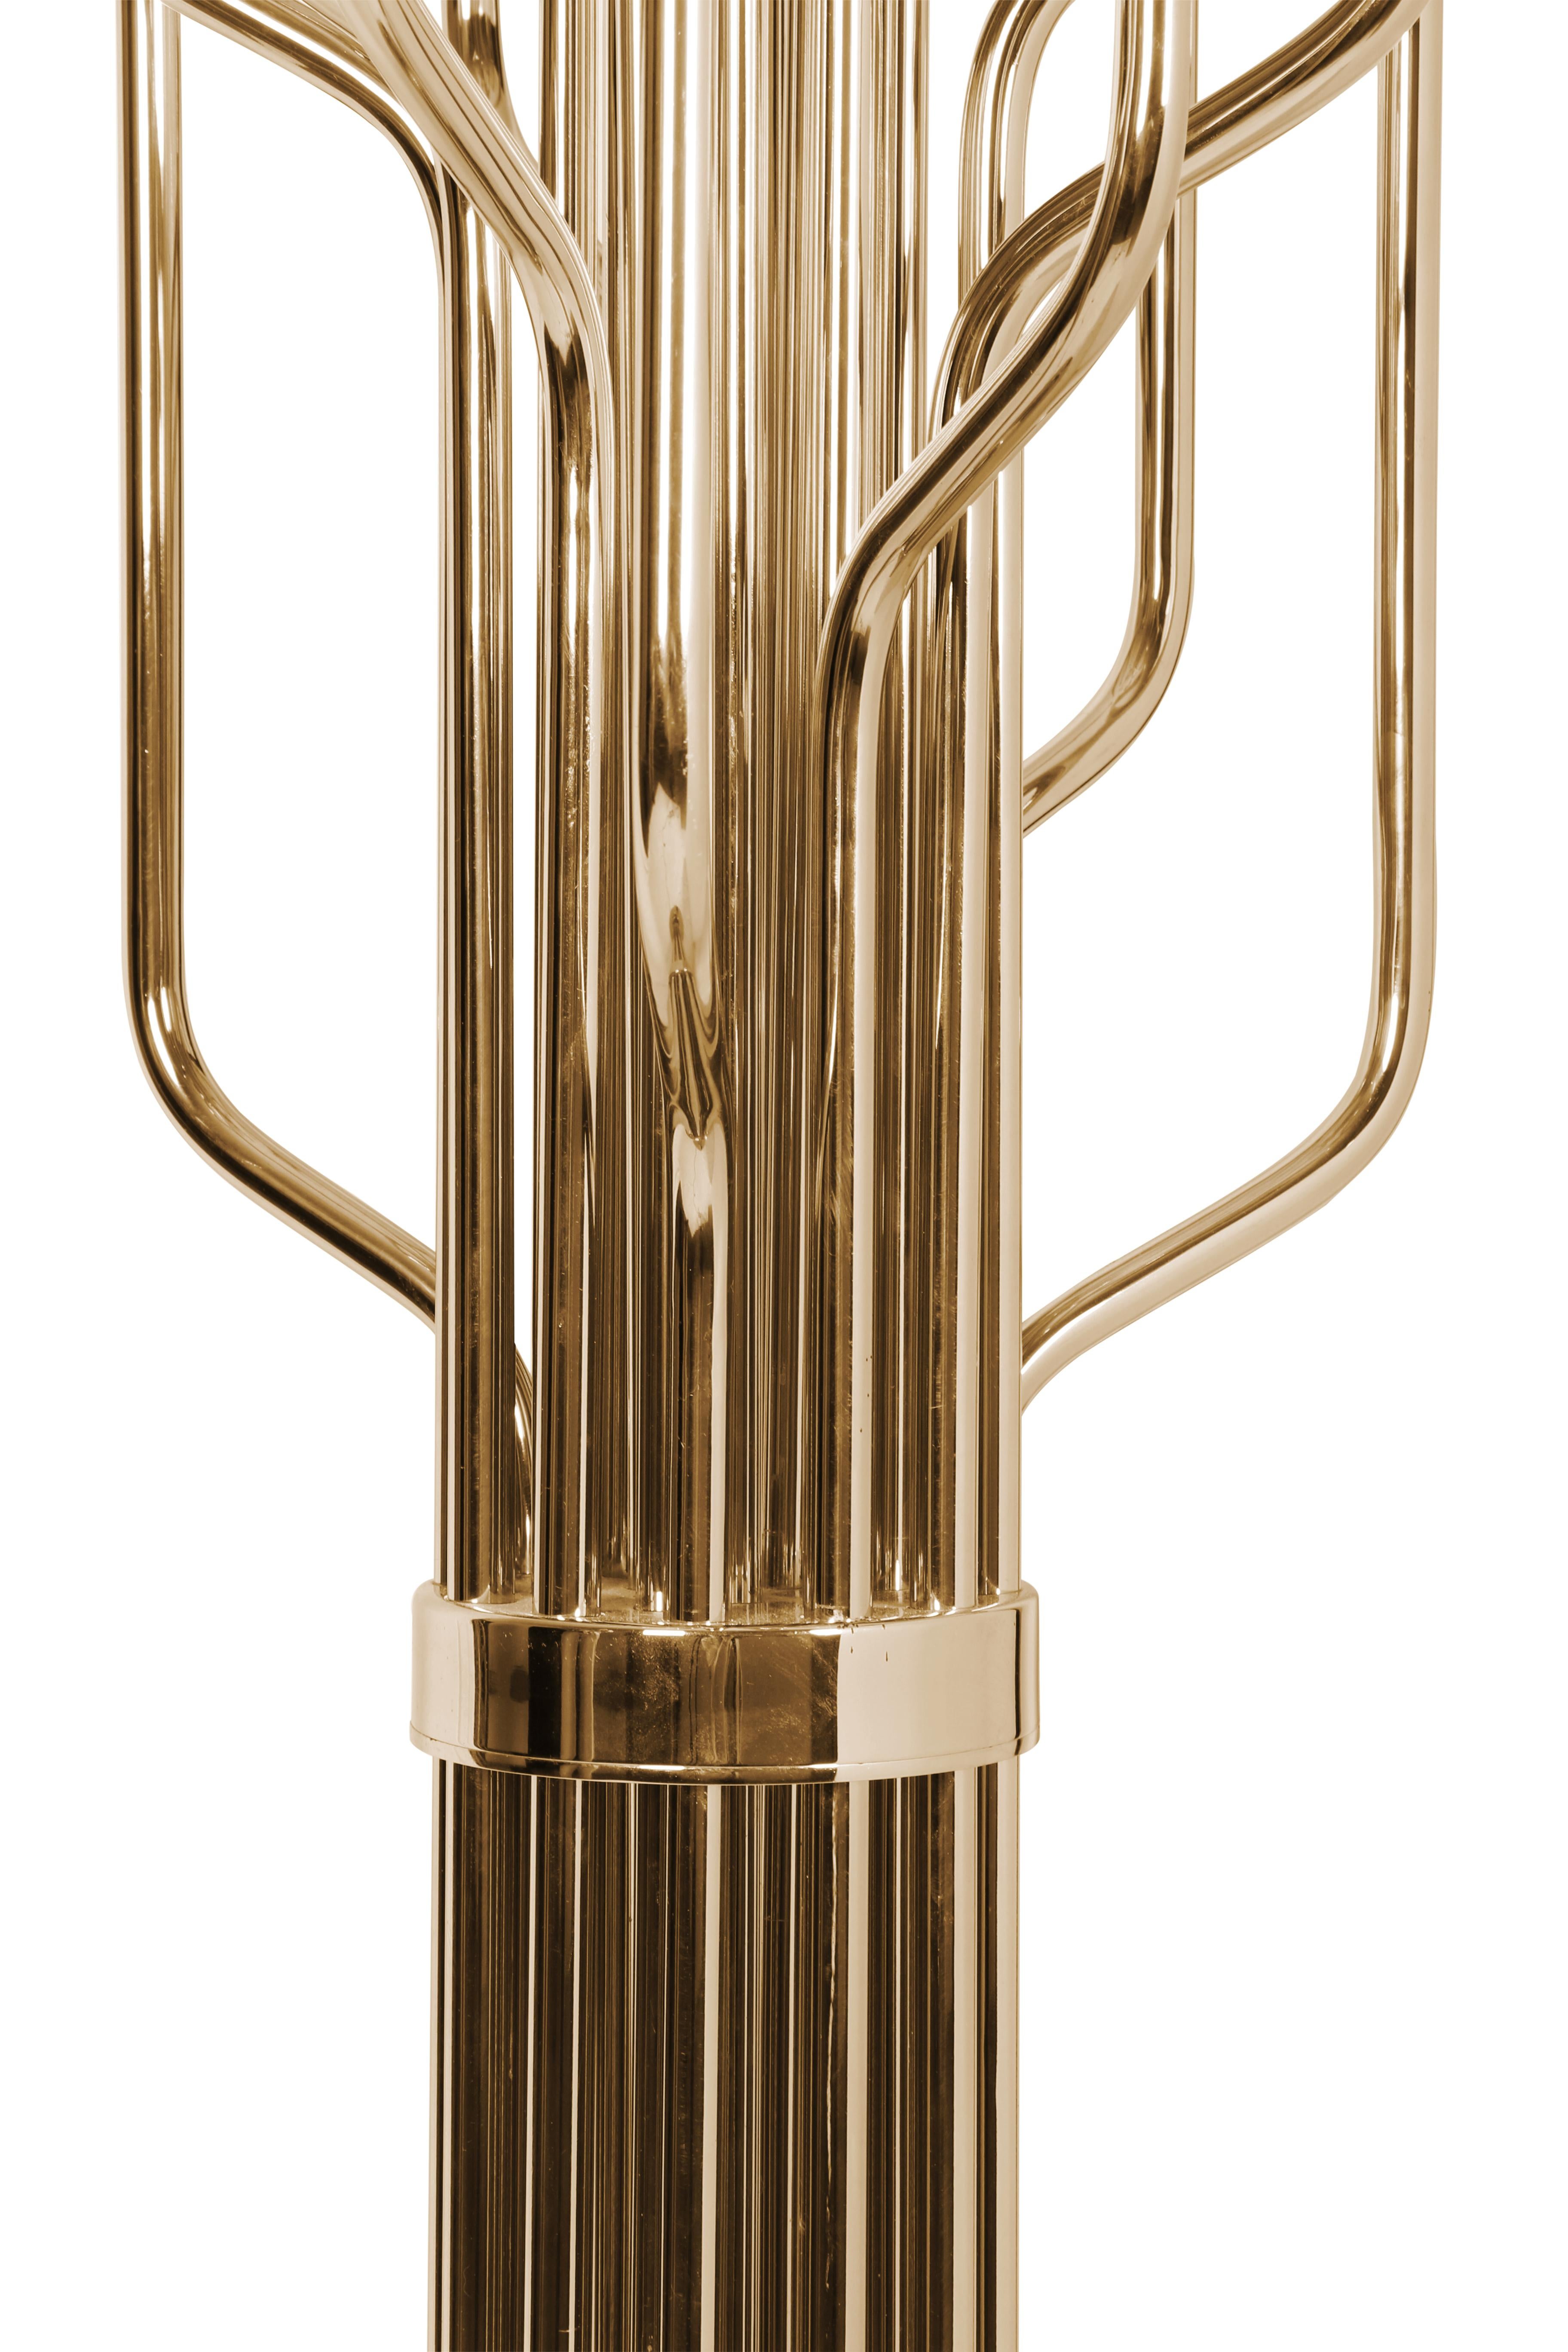 Inspired by Janis Joplin’s music “Best of The Best Gold”, Janis floor lamp recovers the golden jazz spirit of the 1960s. Covered by a golden bath, this entrance floor lamp was designed to make a powerful statement with its Mid-Century Modern design.